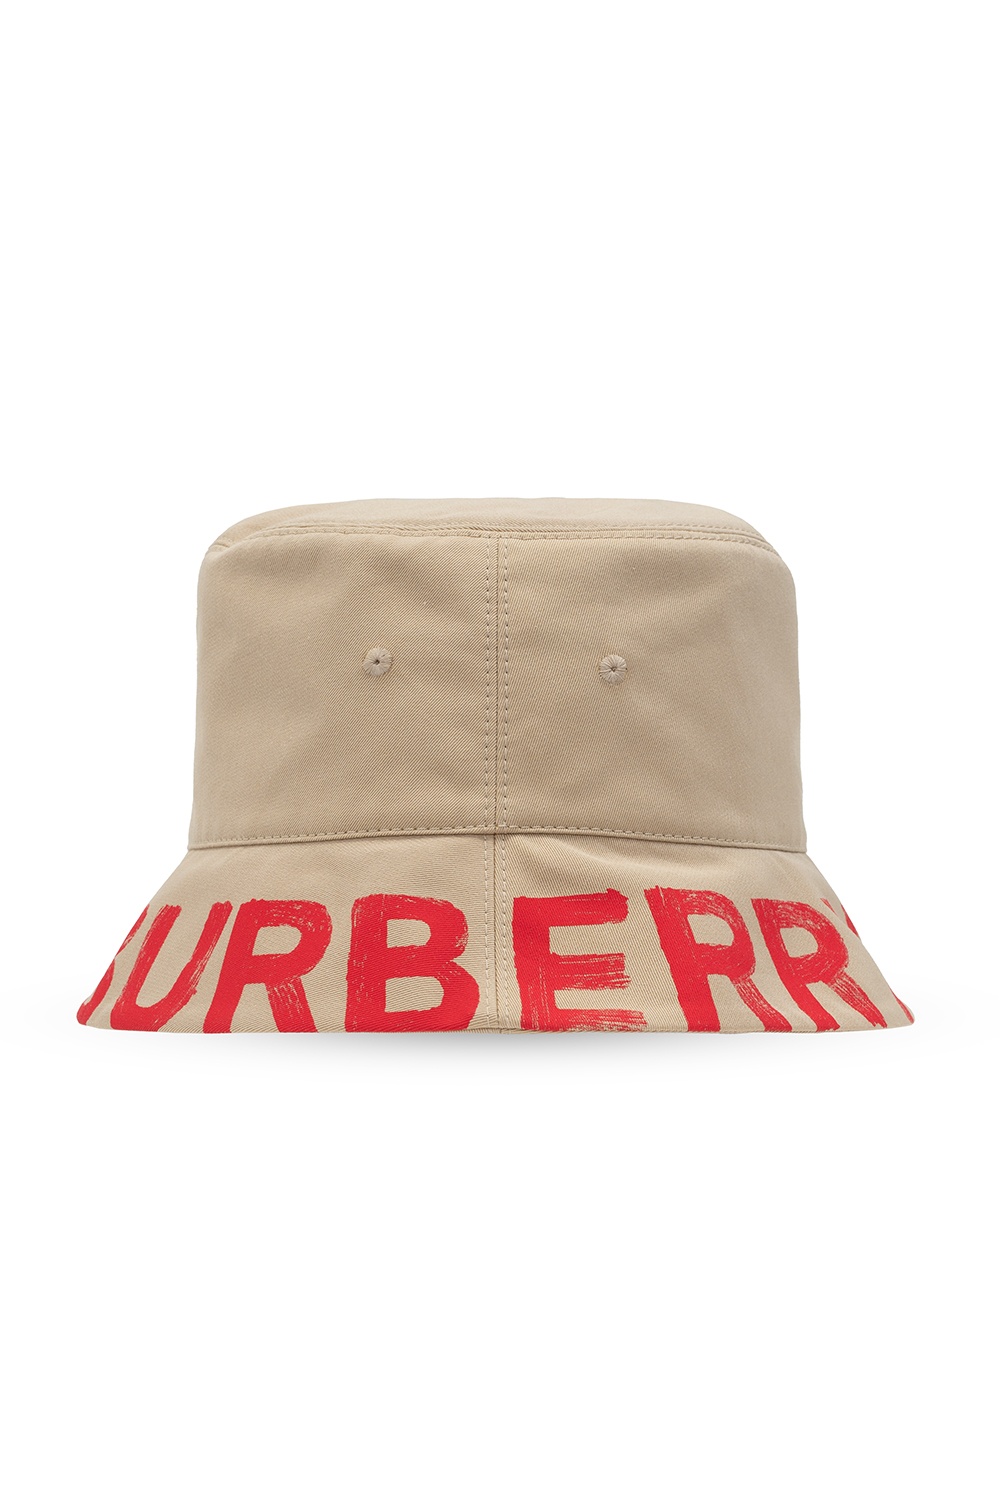 Burberry bow cashmere beanie hat